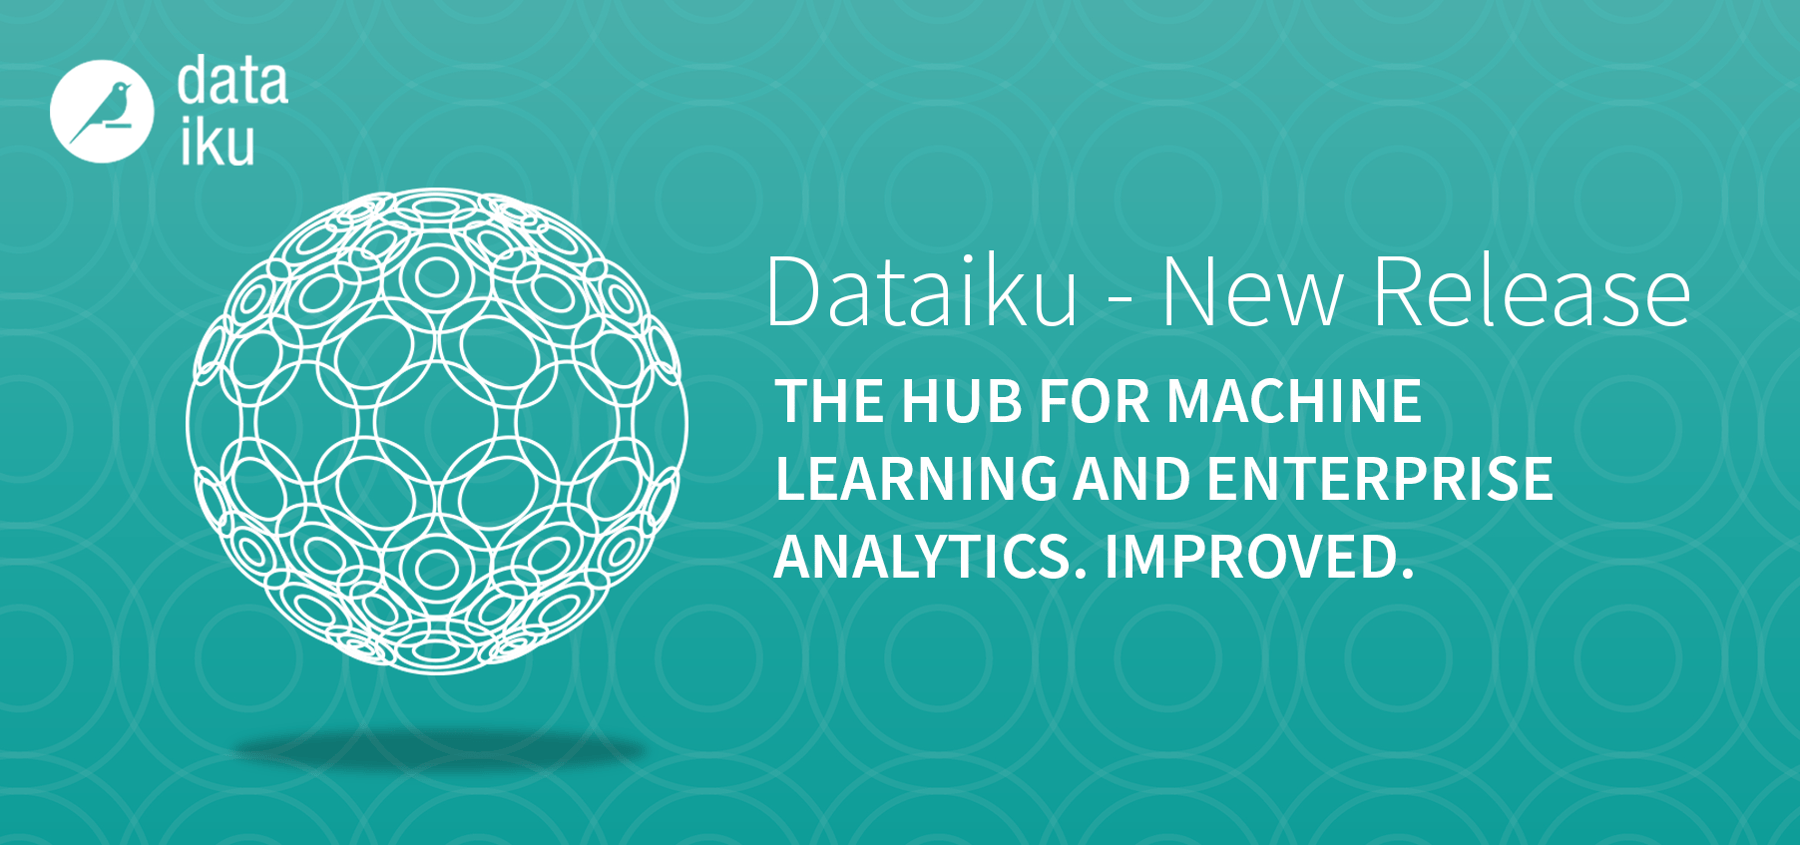 New Release From Dataiku The Hub For Enterprise Analytics And Machine Learning Improved 2850